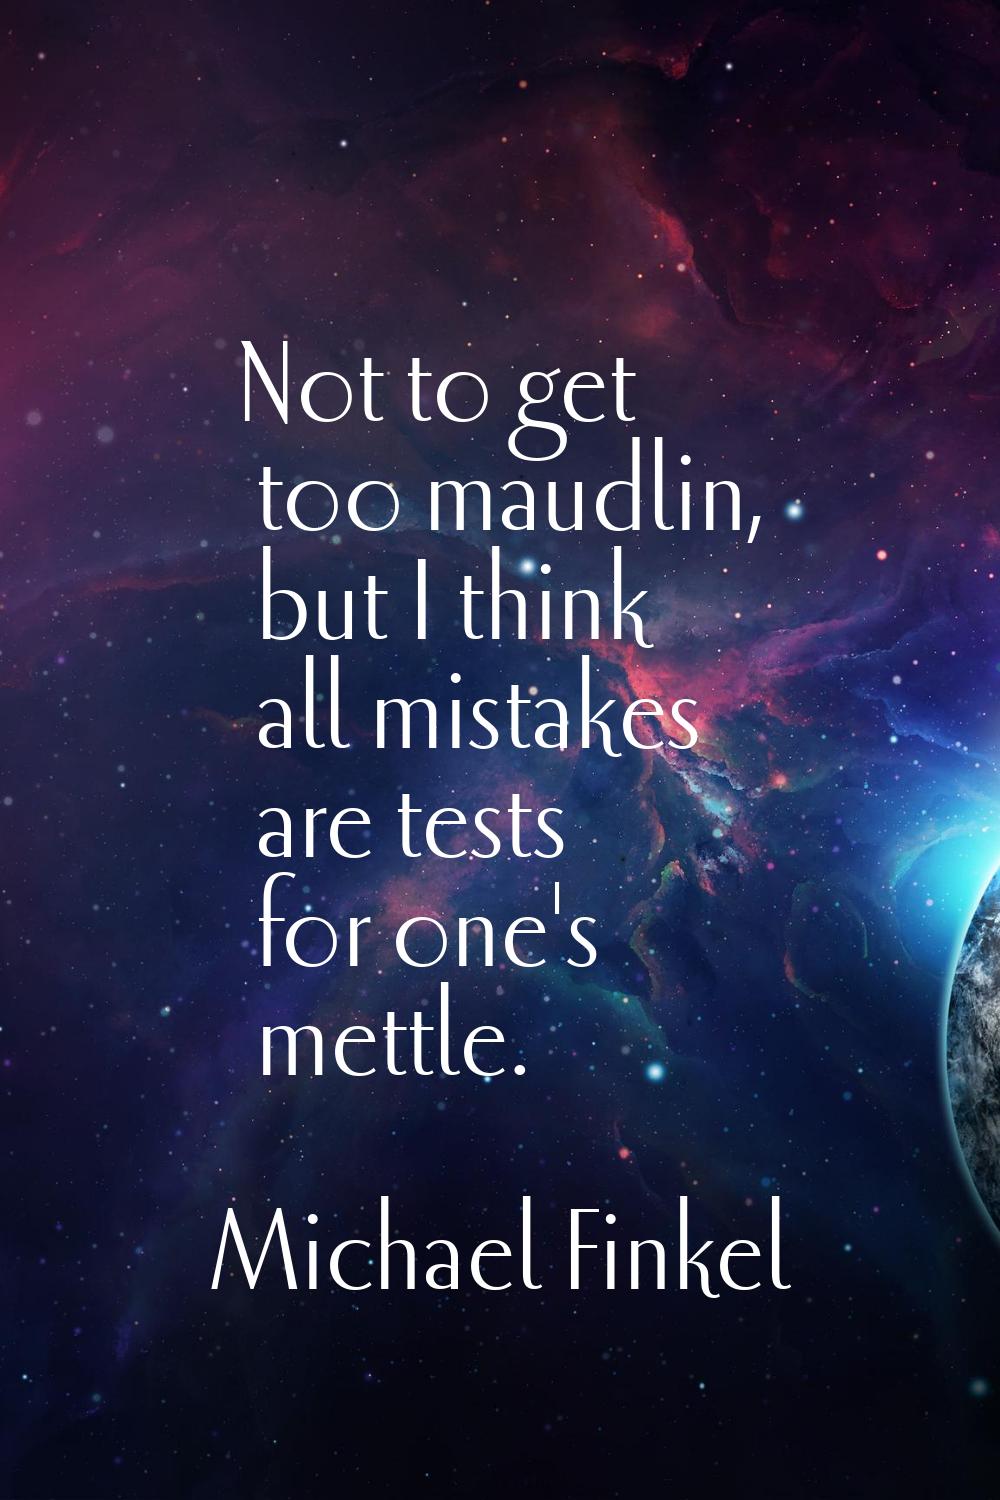 Not to get too maudlin, but I think all mistakes are tests for one's mettle.